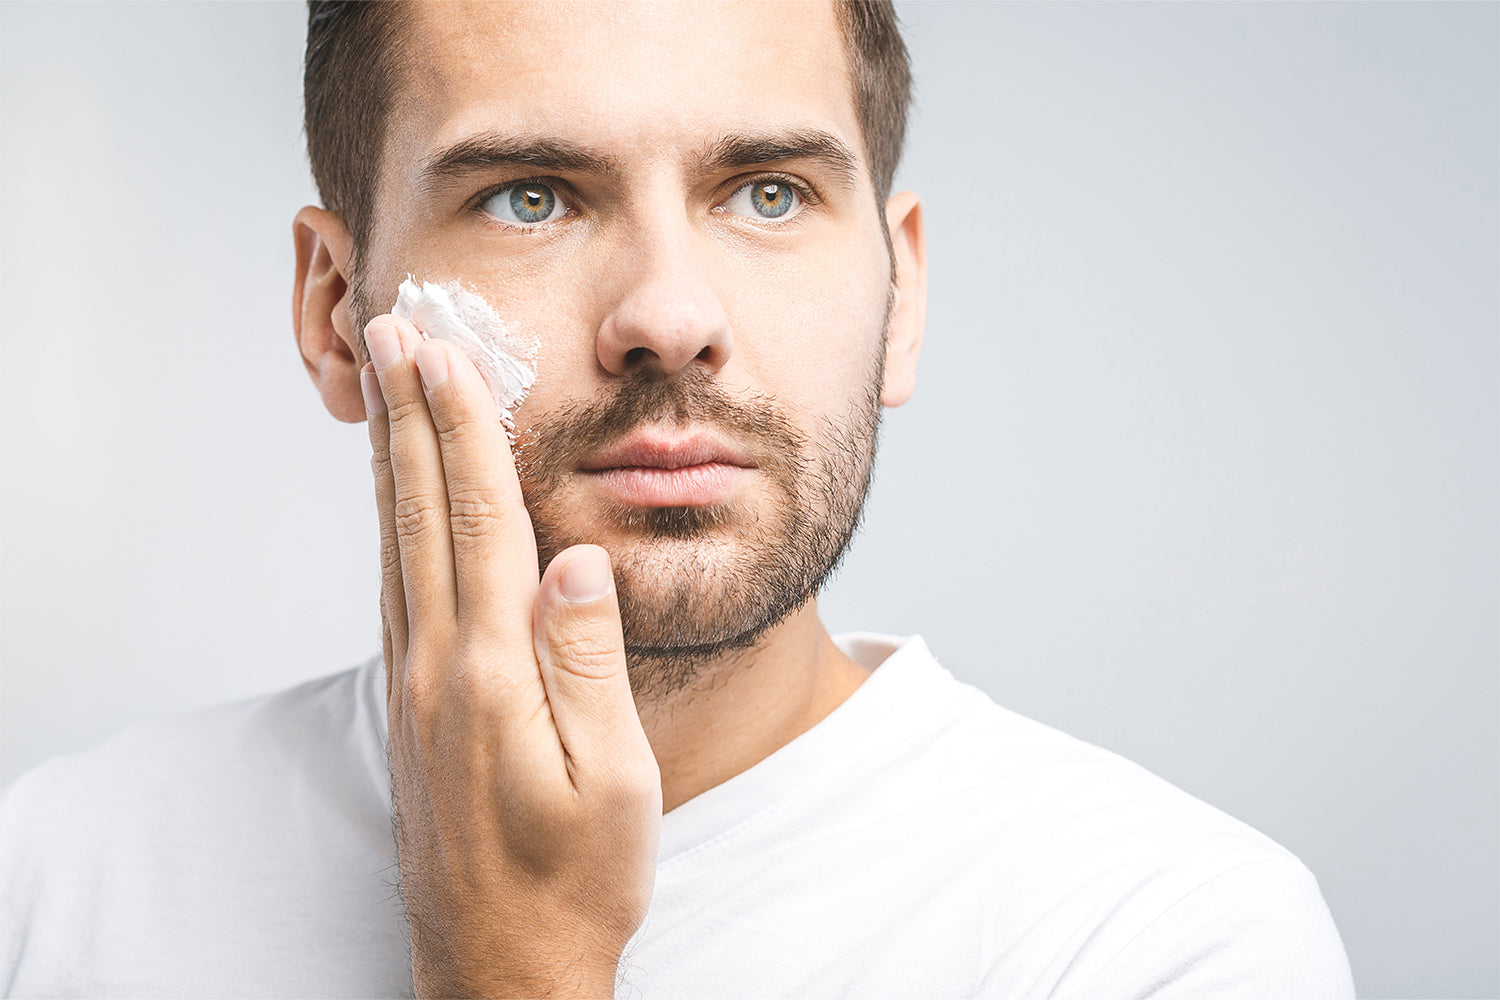 How To Deal With Dry Flaky Skin on Face